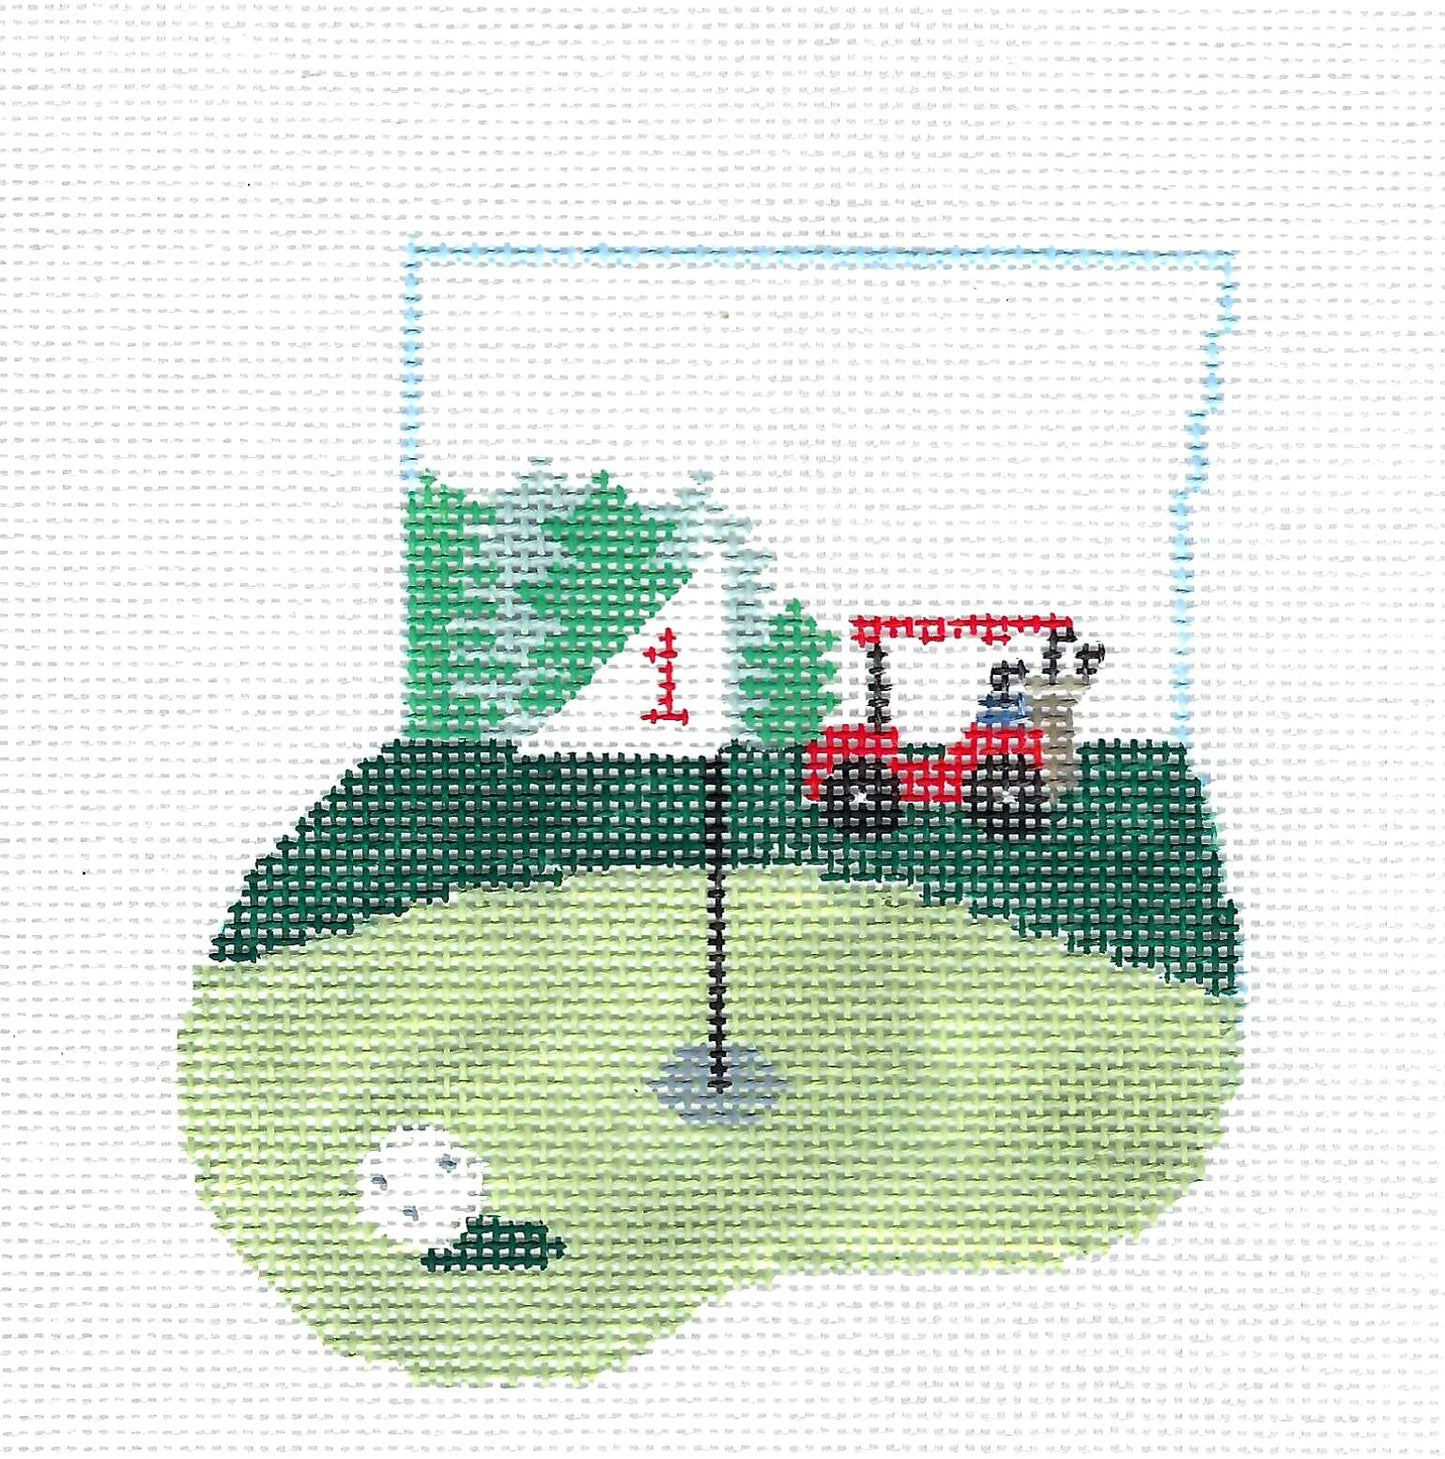 Sports ~ GOLF COURSE & BALL SET~ handpainted 18 mesh Needlepoint Mini Stocking Ornament & Ball Canvas by Kathy Schenkel